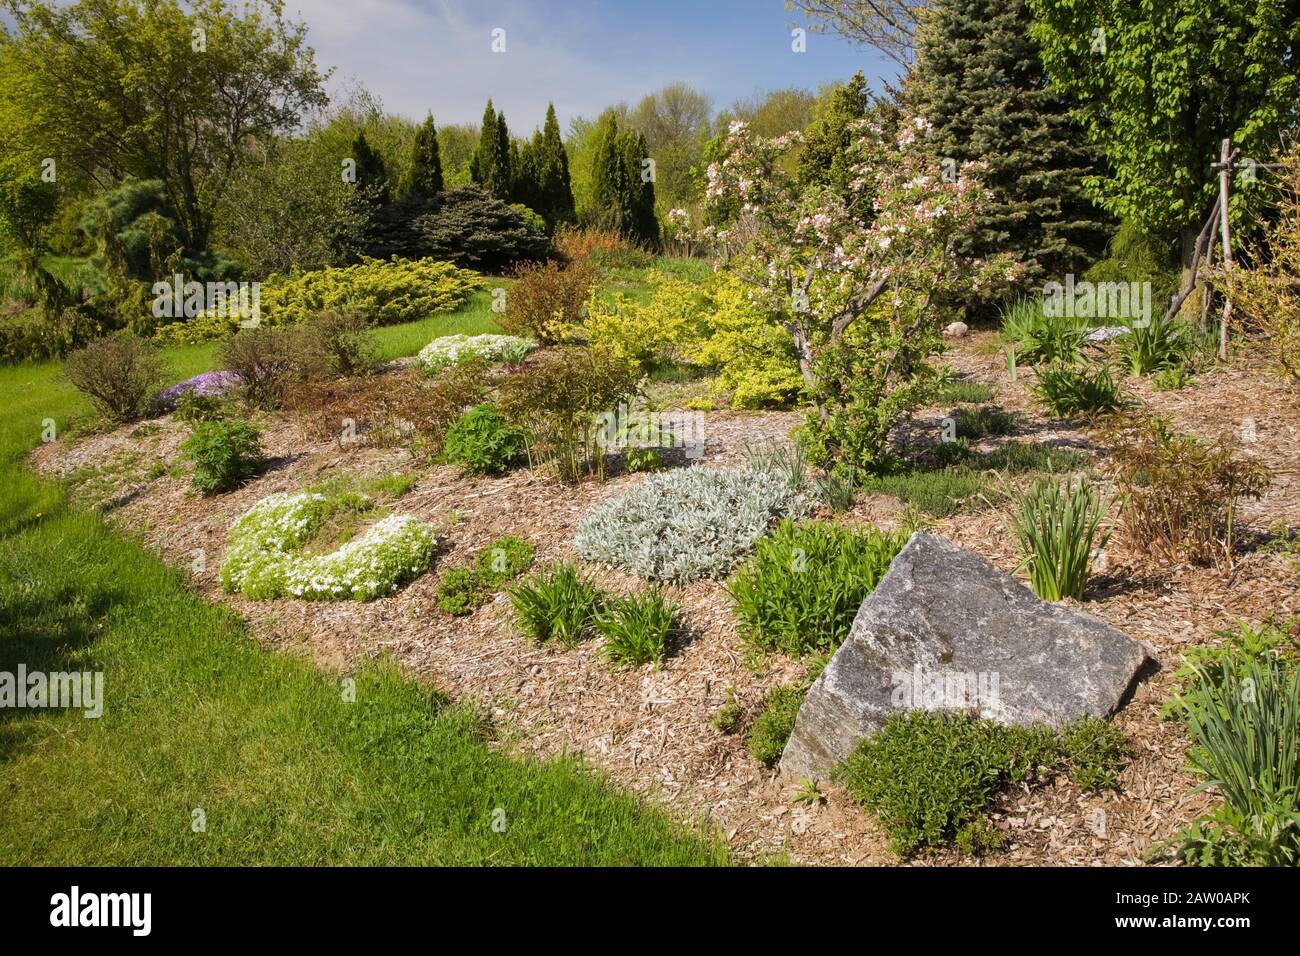 Mulch border with mixed perennial plants, shrubs, flowers and trees including a white and red flowering Bonsai Pyrus malus - Crabapple tree Stock Photo